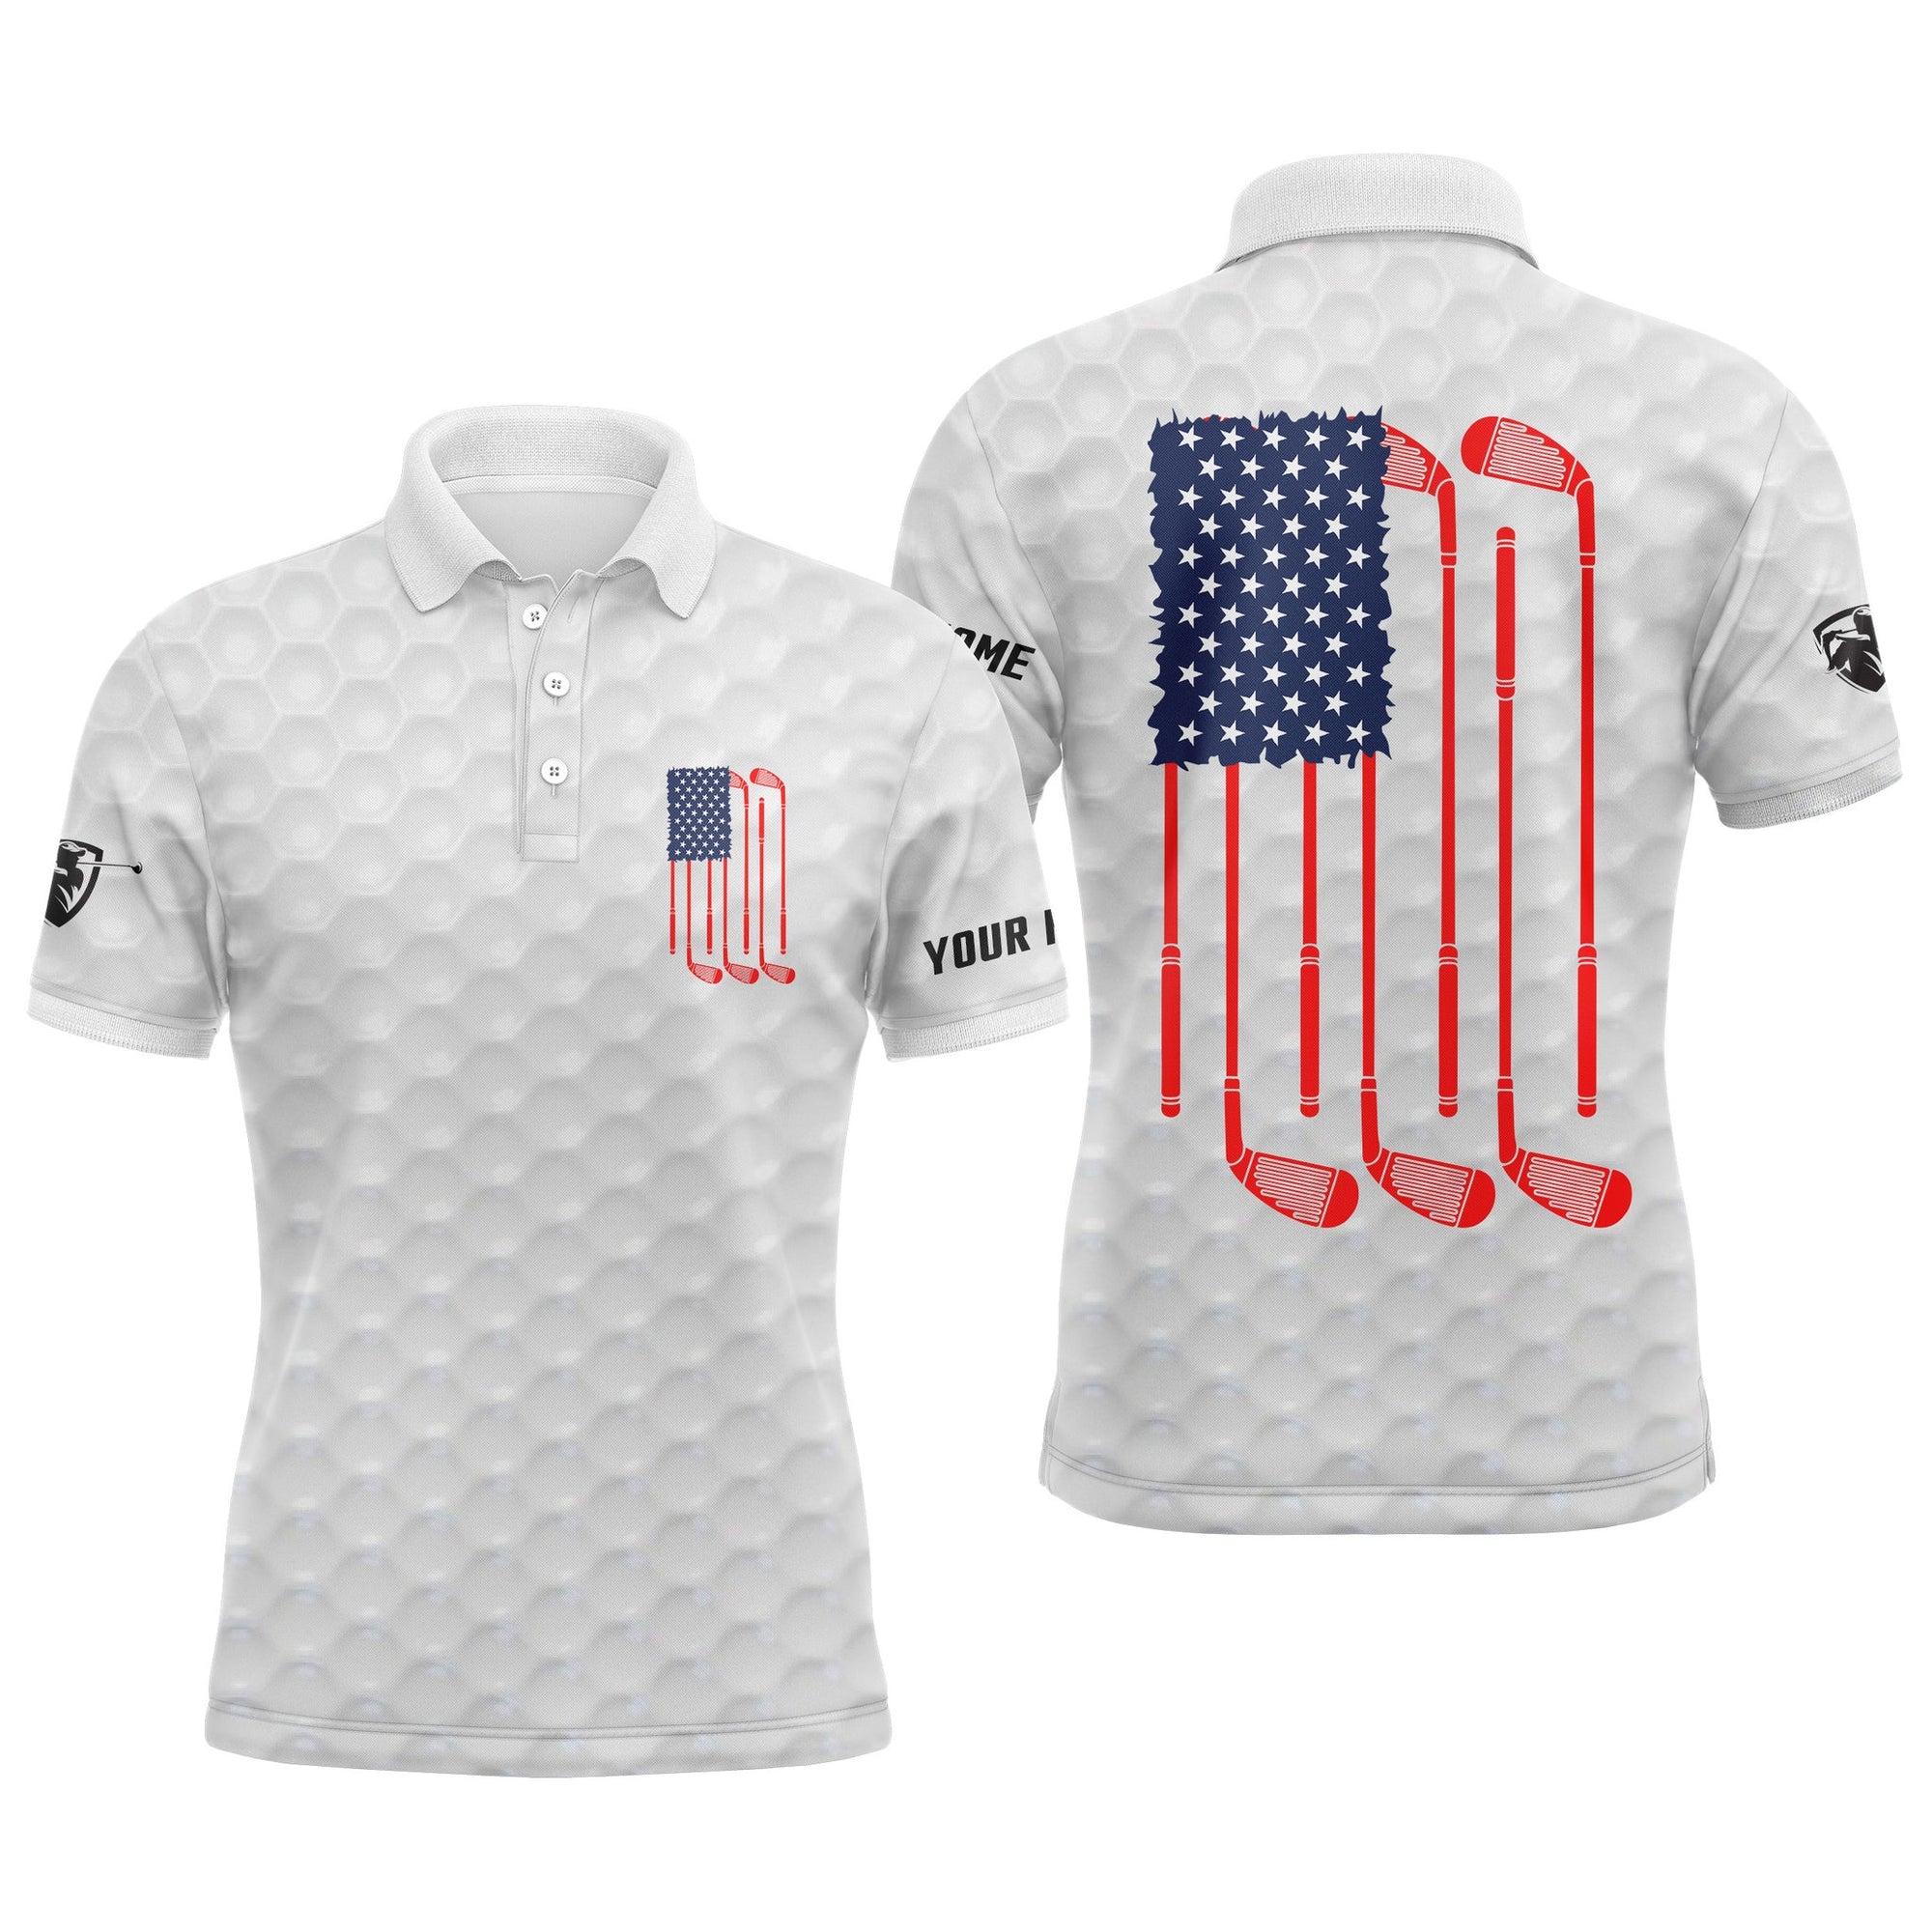 Golf Custom Name Men Polo Shirt - Patriotic American Flag Golf Clubs White Apparel - Personalized Best Gift For Golf Lover, Team, Golfer, 4th July